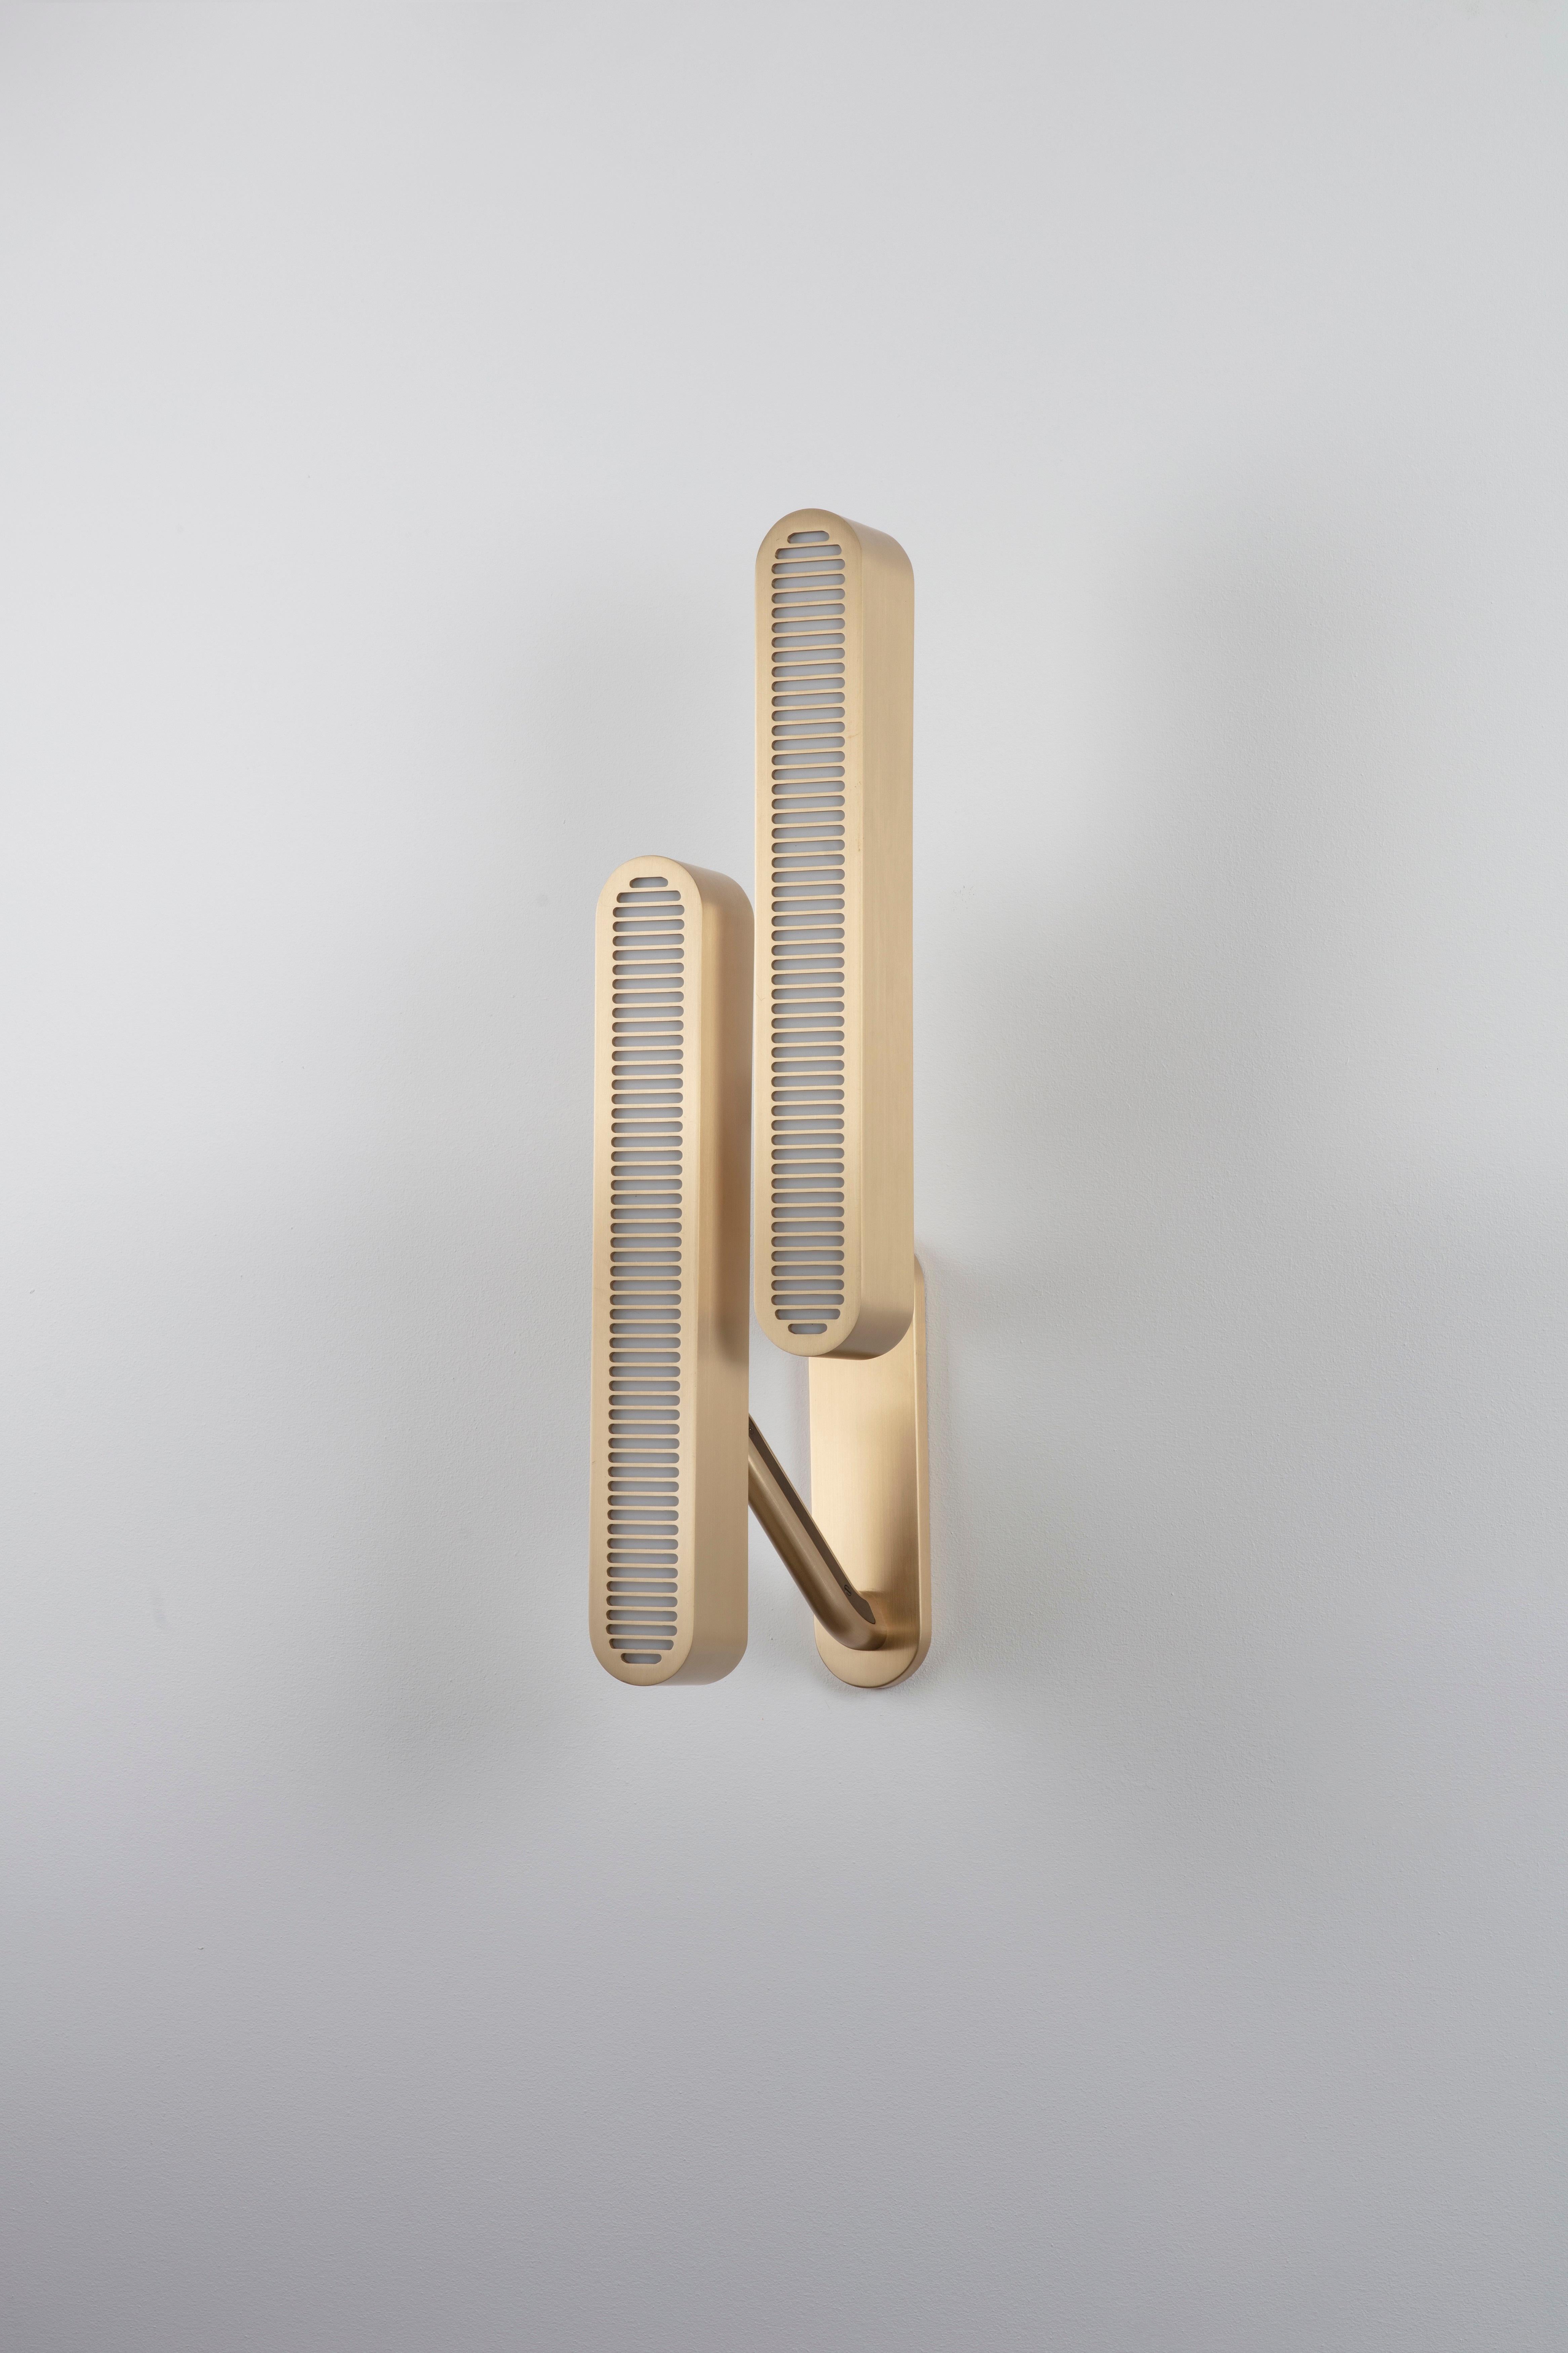 Colt wall light double by Bert Frank
Dimensions: 56.5 x 14.5 x 6 cm
Materials: Brass, bronze

Brushed brass lacquered as standard, custom finishes available.

The Bert Frank aesthetic is one of subtle quirks and twists. Asymmetry is one of